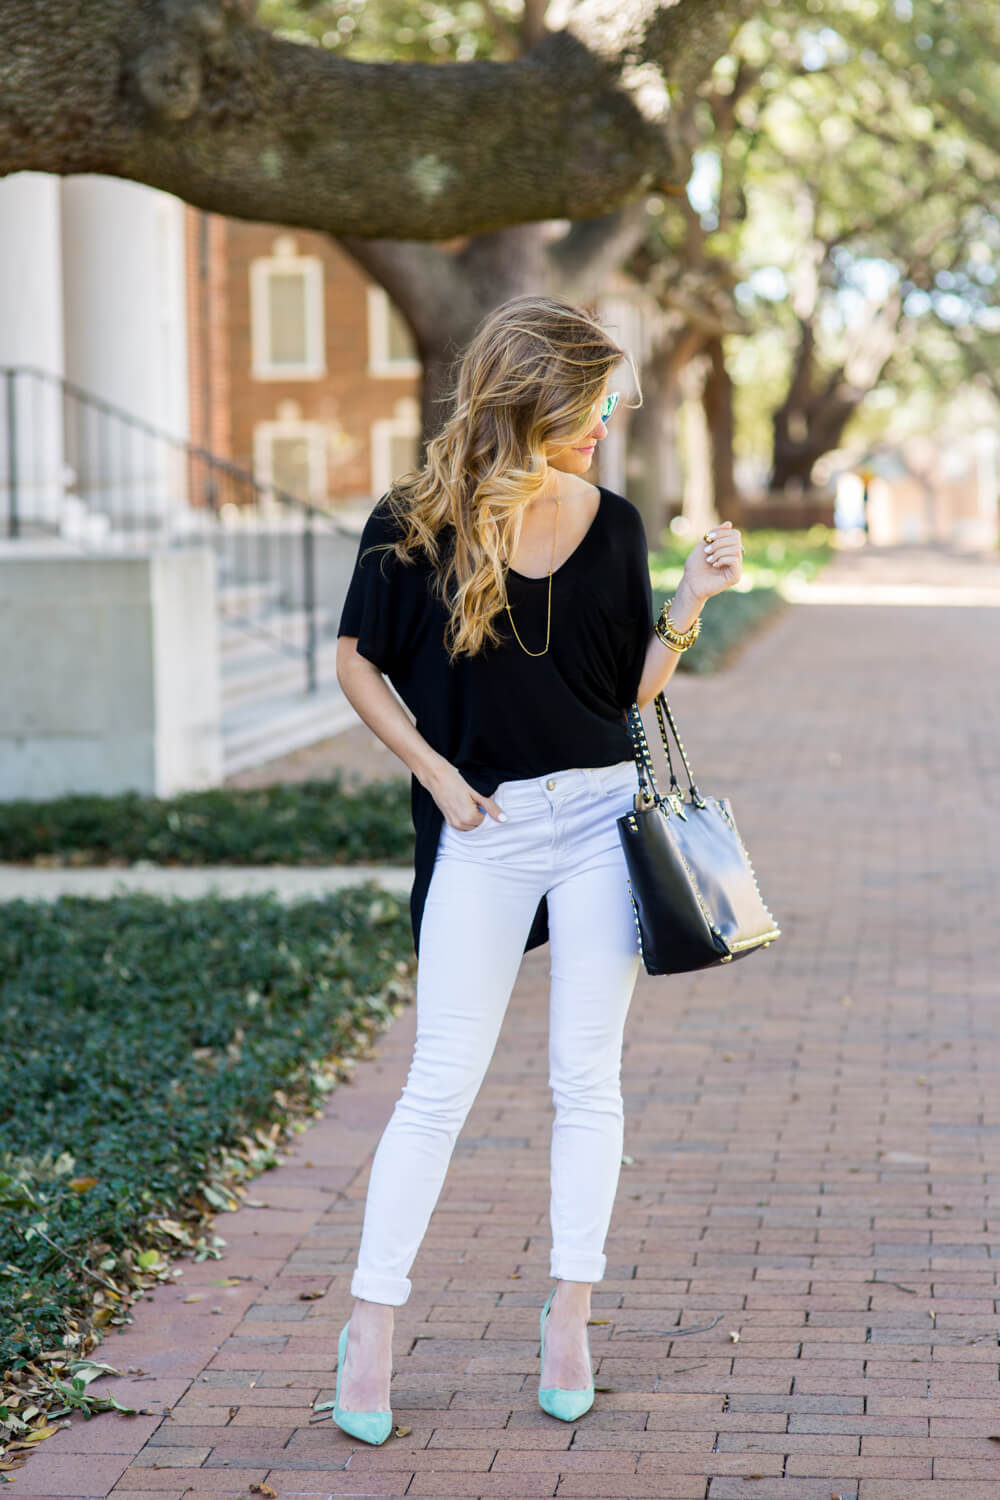 how to dress up a tee shirt, white jeans outfit, white jeans dressed up with black tee, white jeans with pointed toe pumps, white jeans and black tee outfit, valentino rockstud bag, casual laid back chic outfit, going out outfit, summer style, white jeans going out outfit